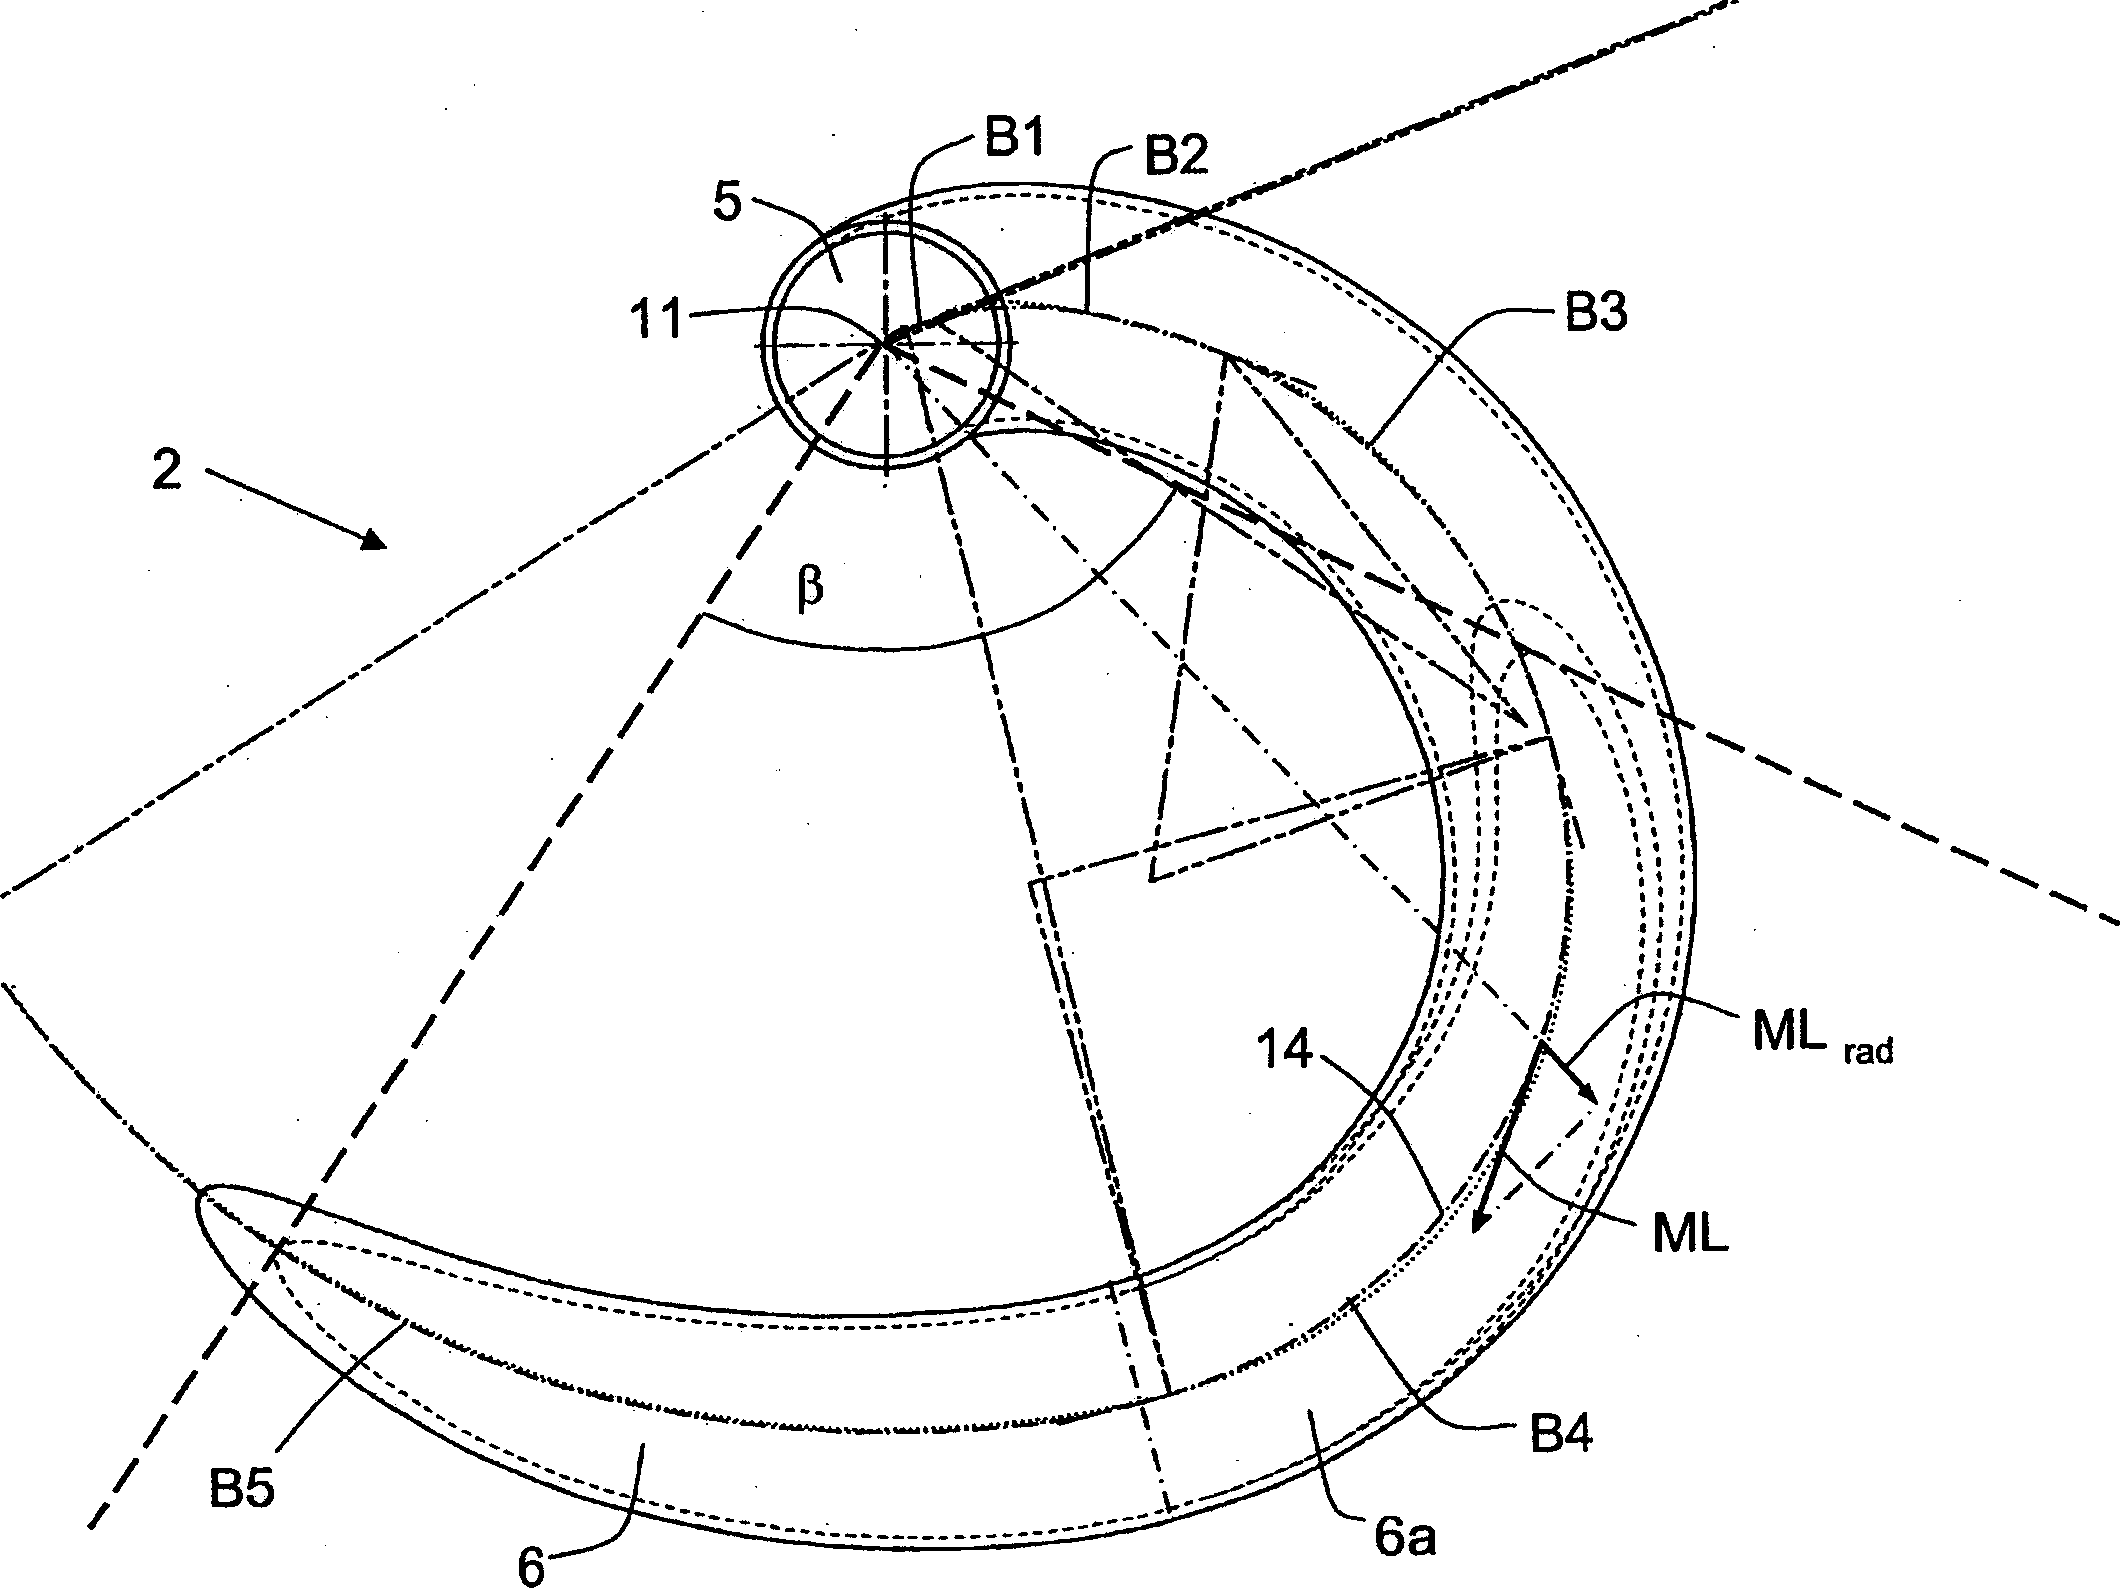 Revolving plate for a sliver depositing device